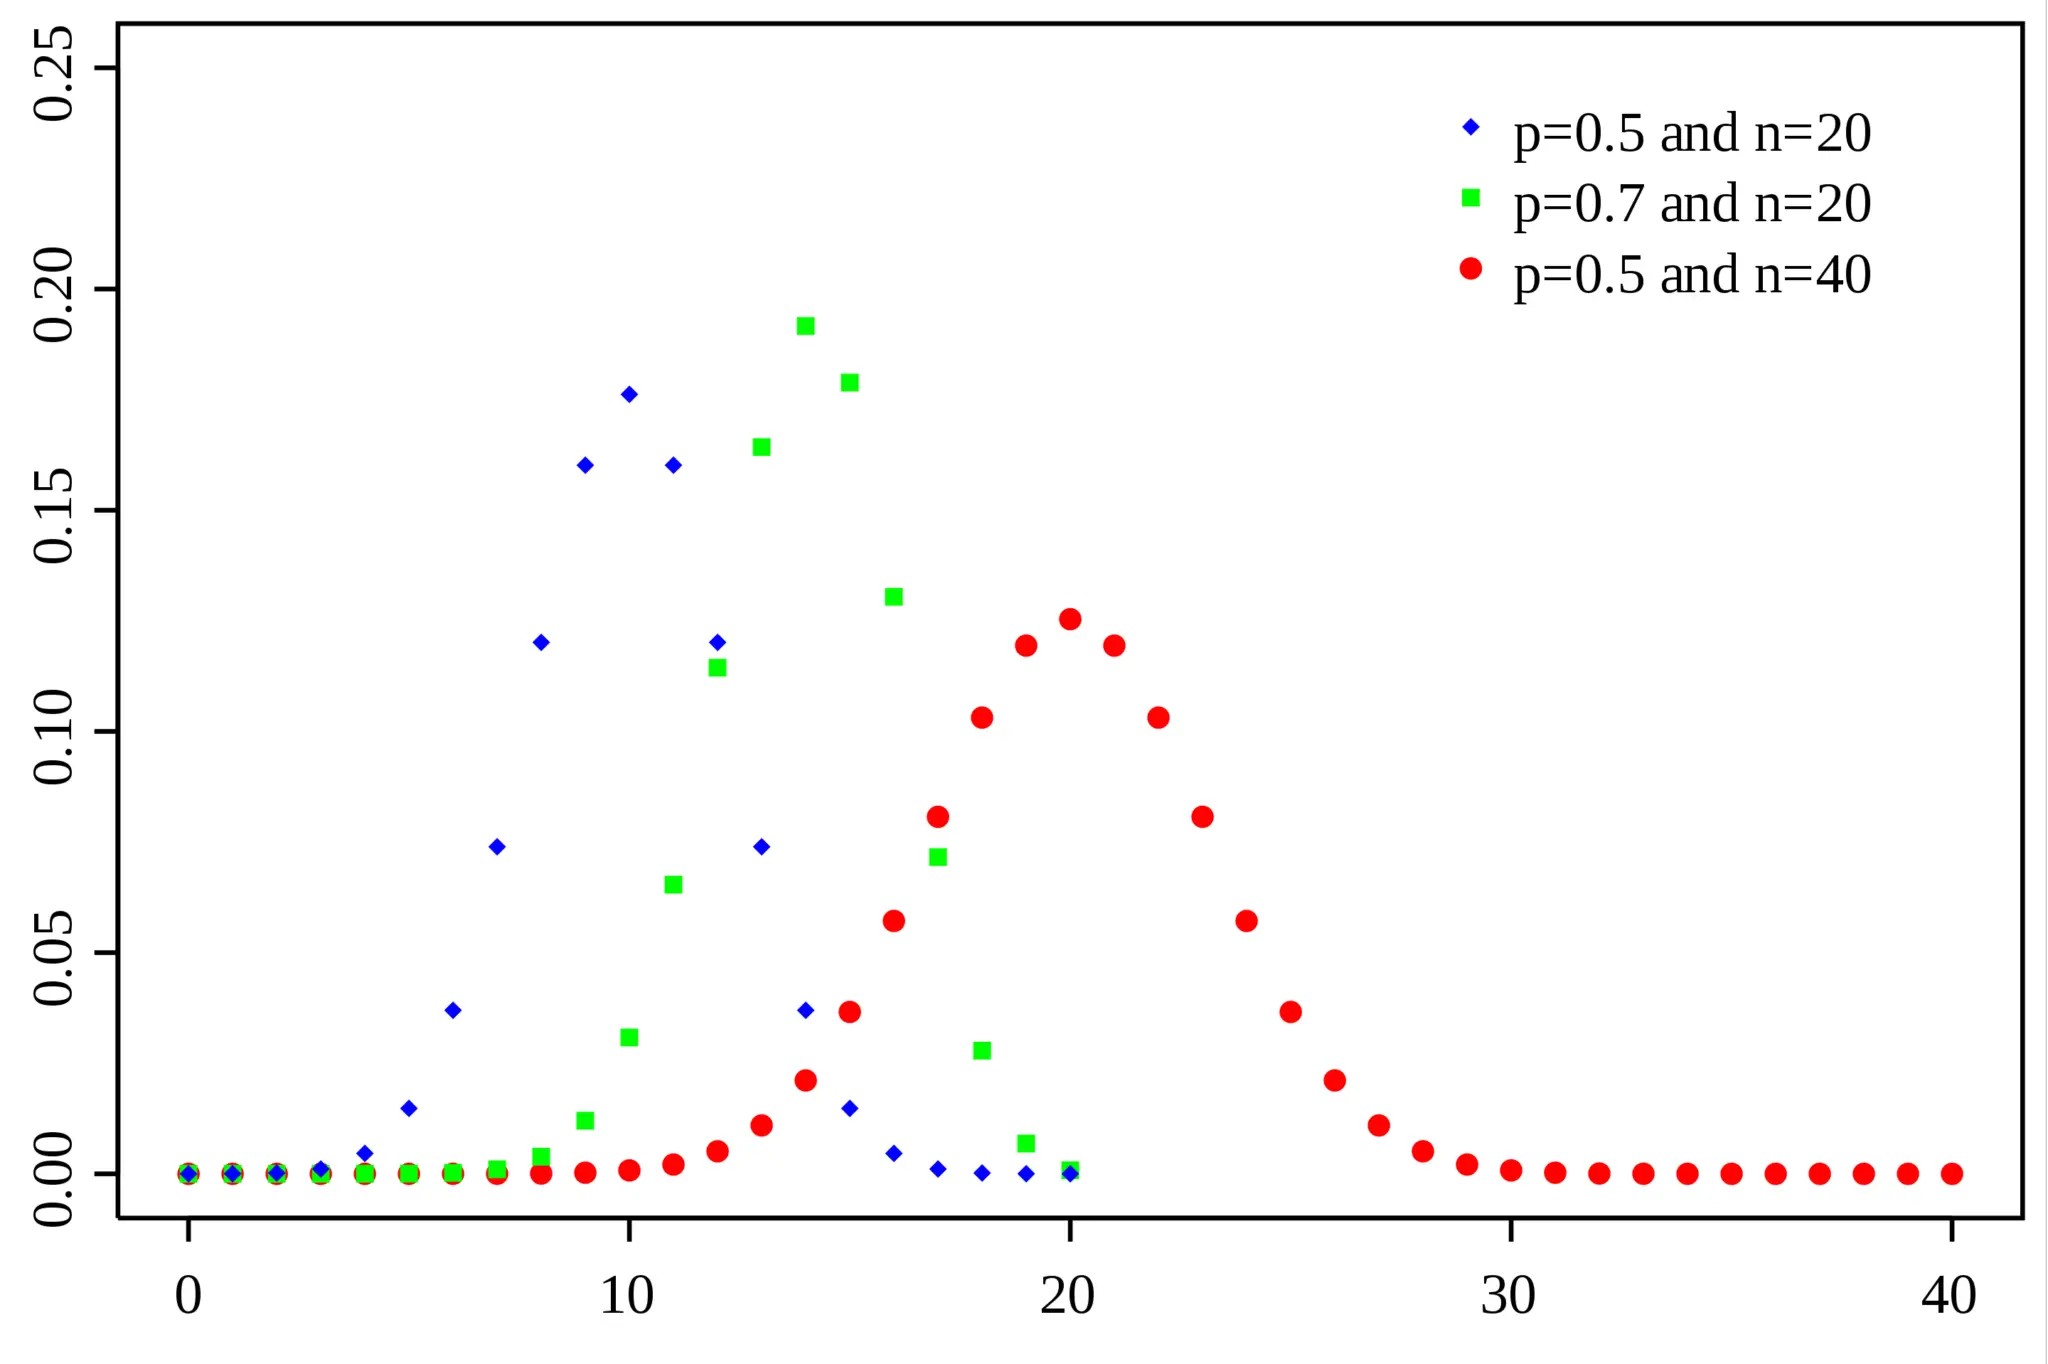 Bernoulli Random Variables and the Binomial Distribution in Probability